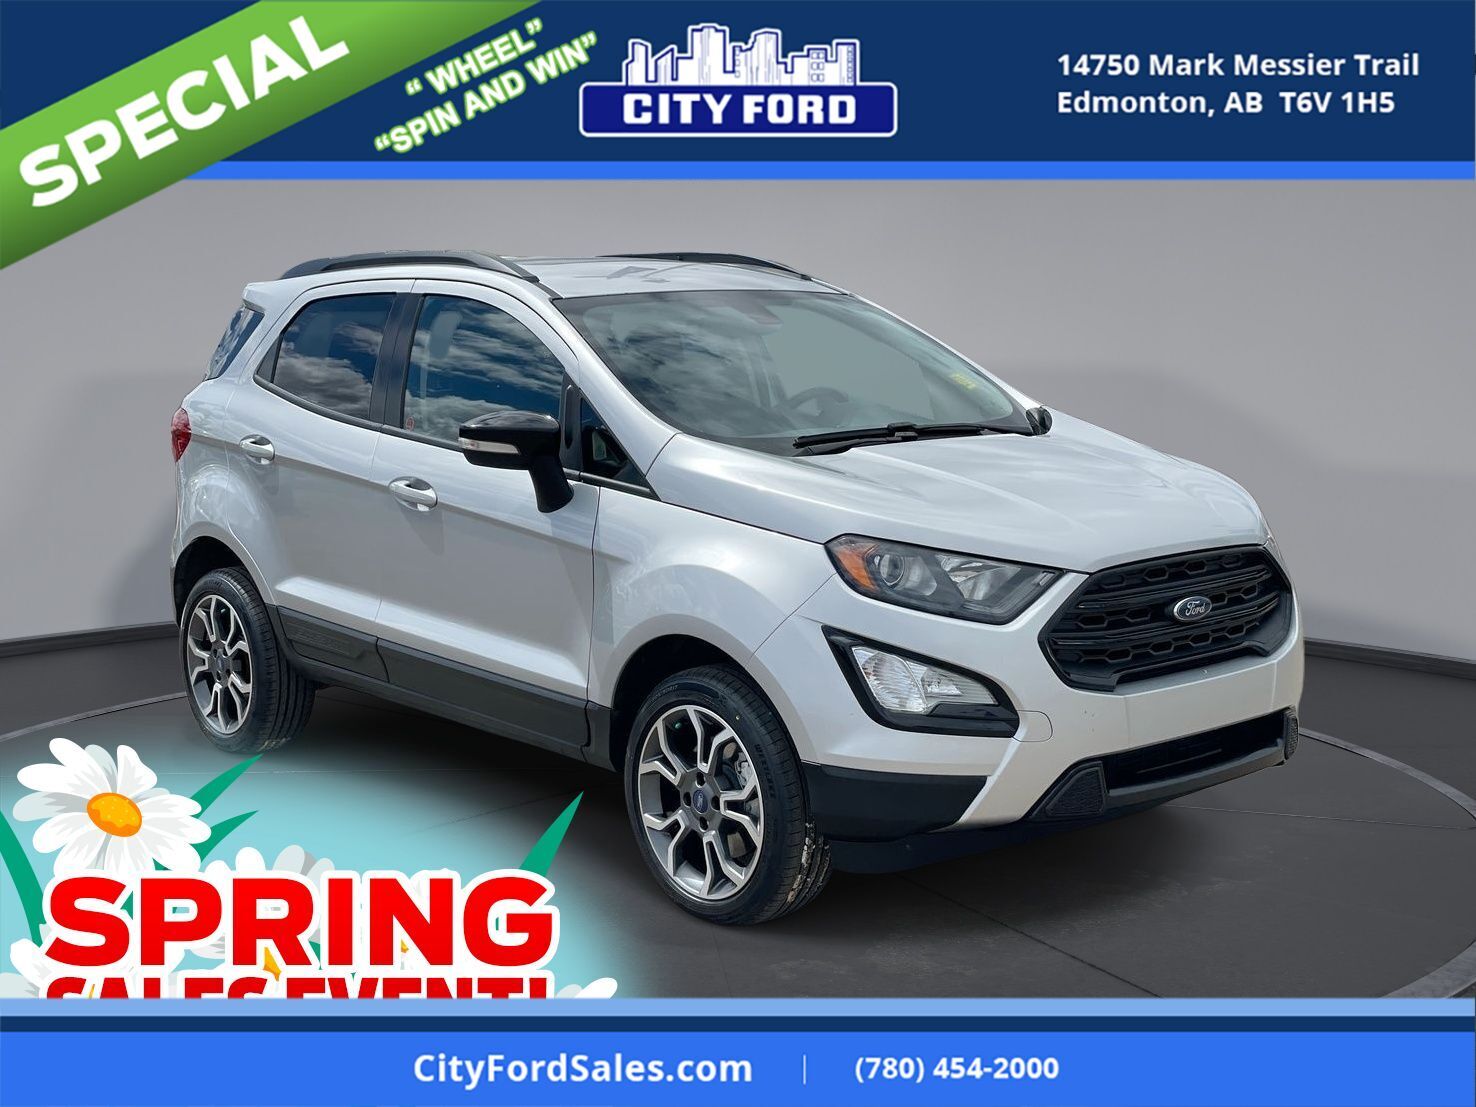 2019 Ford EcoSport SES 4x4